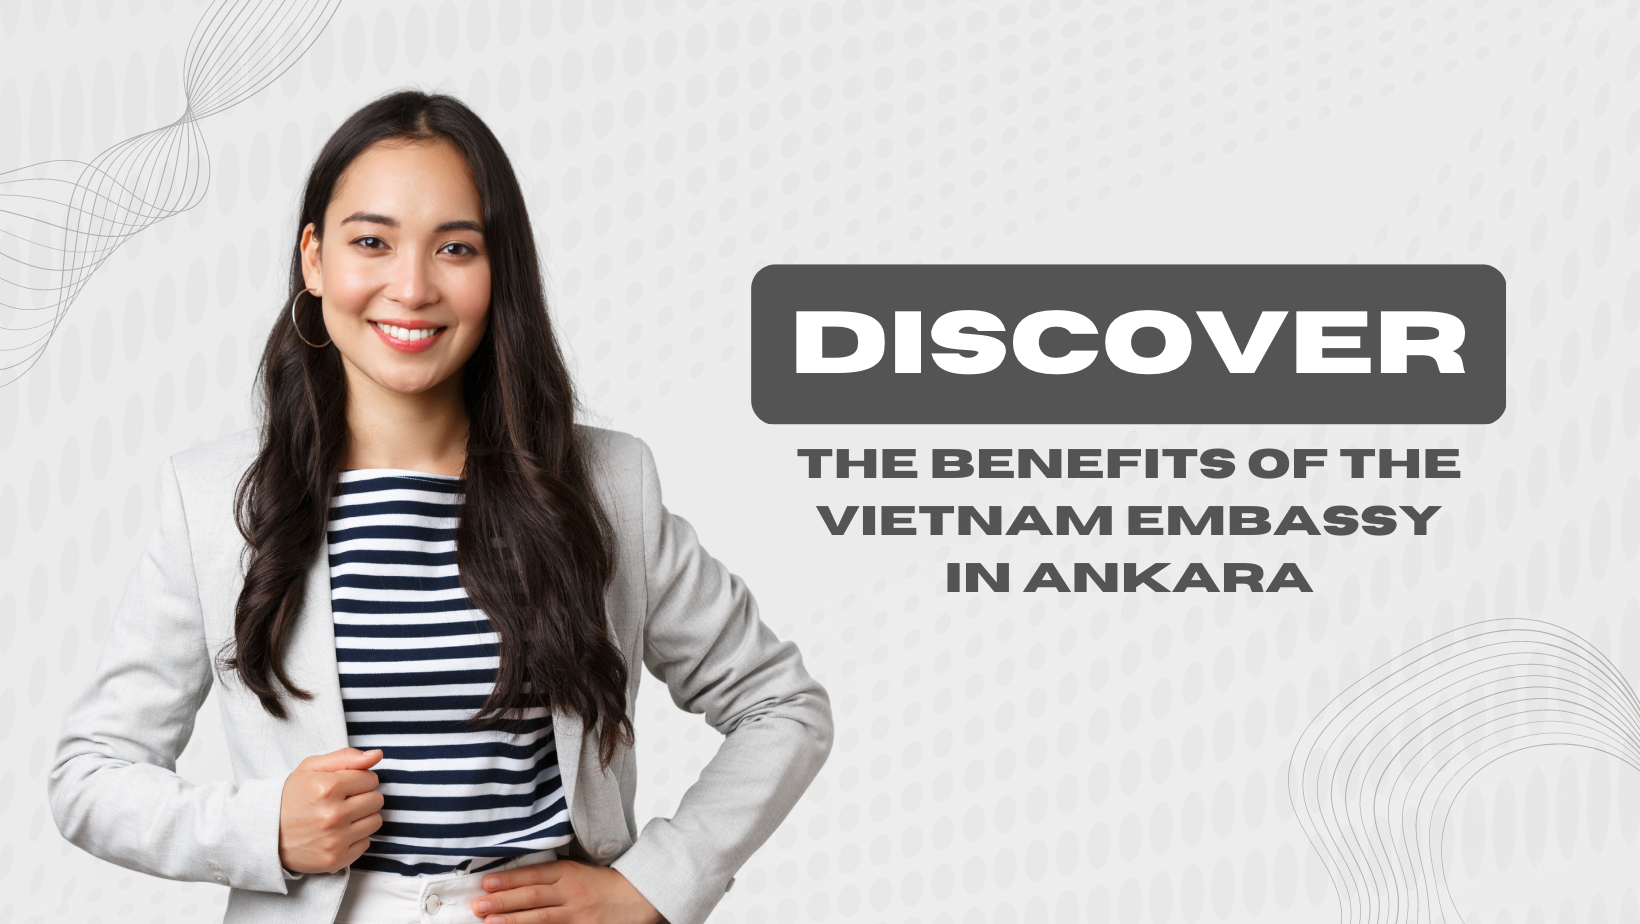 Discover the Benefits of the Vietnam Embassy in Ankara